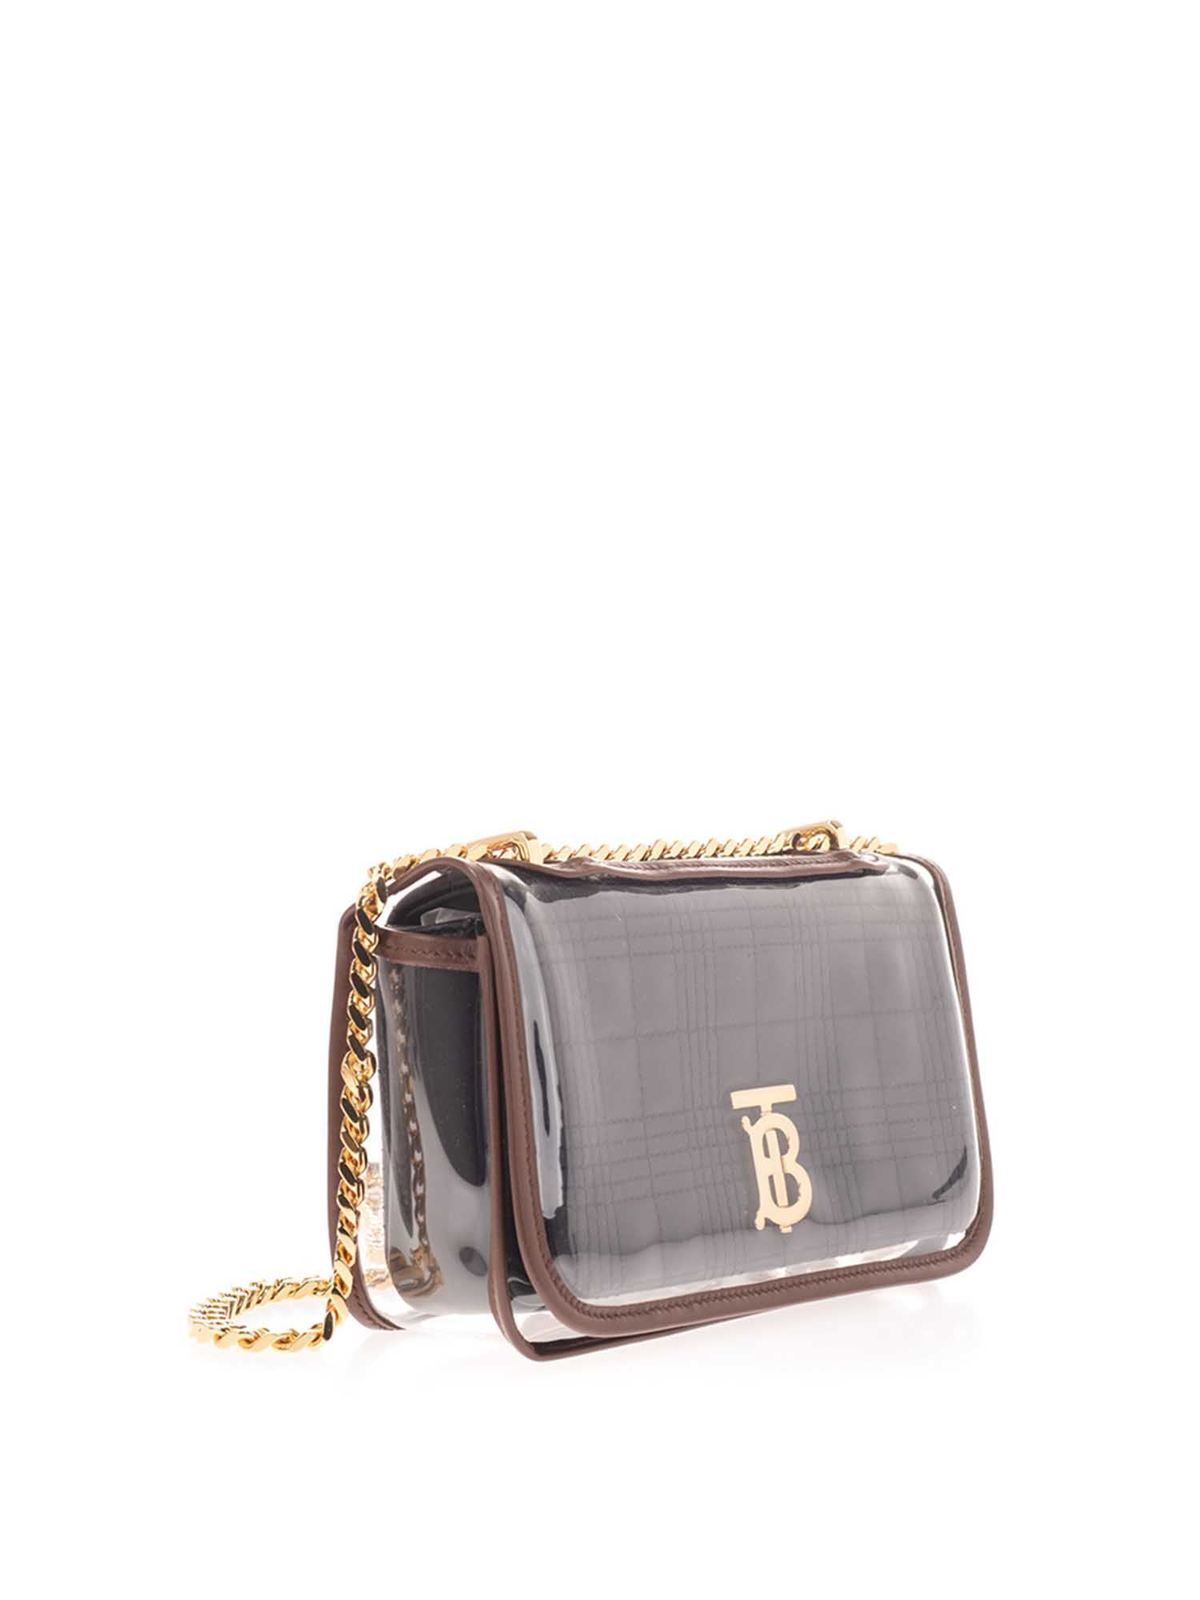 Cross body bags Burberry - Lola mini with transparent cover bag in